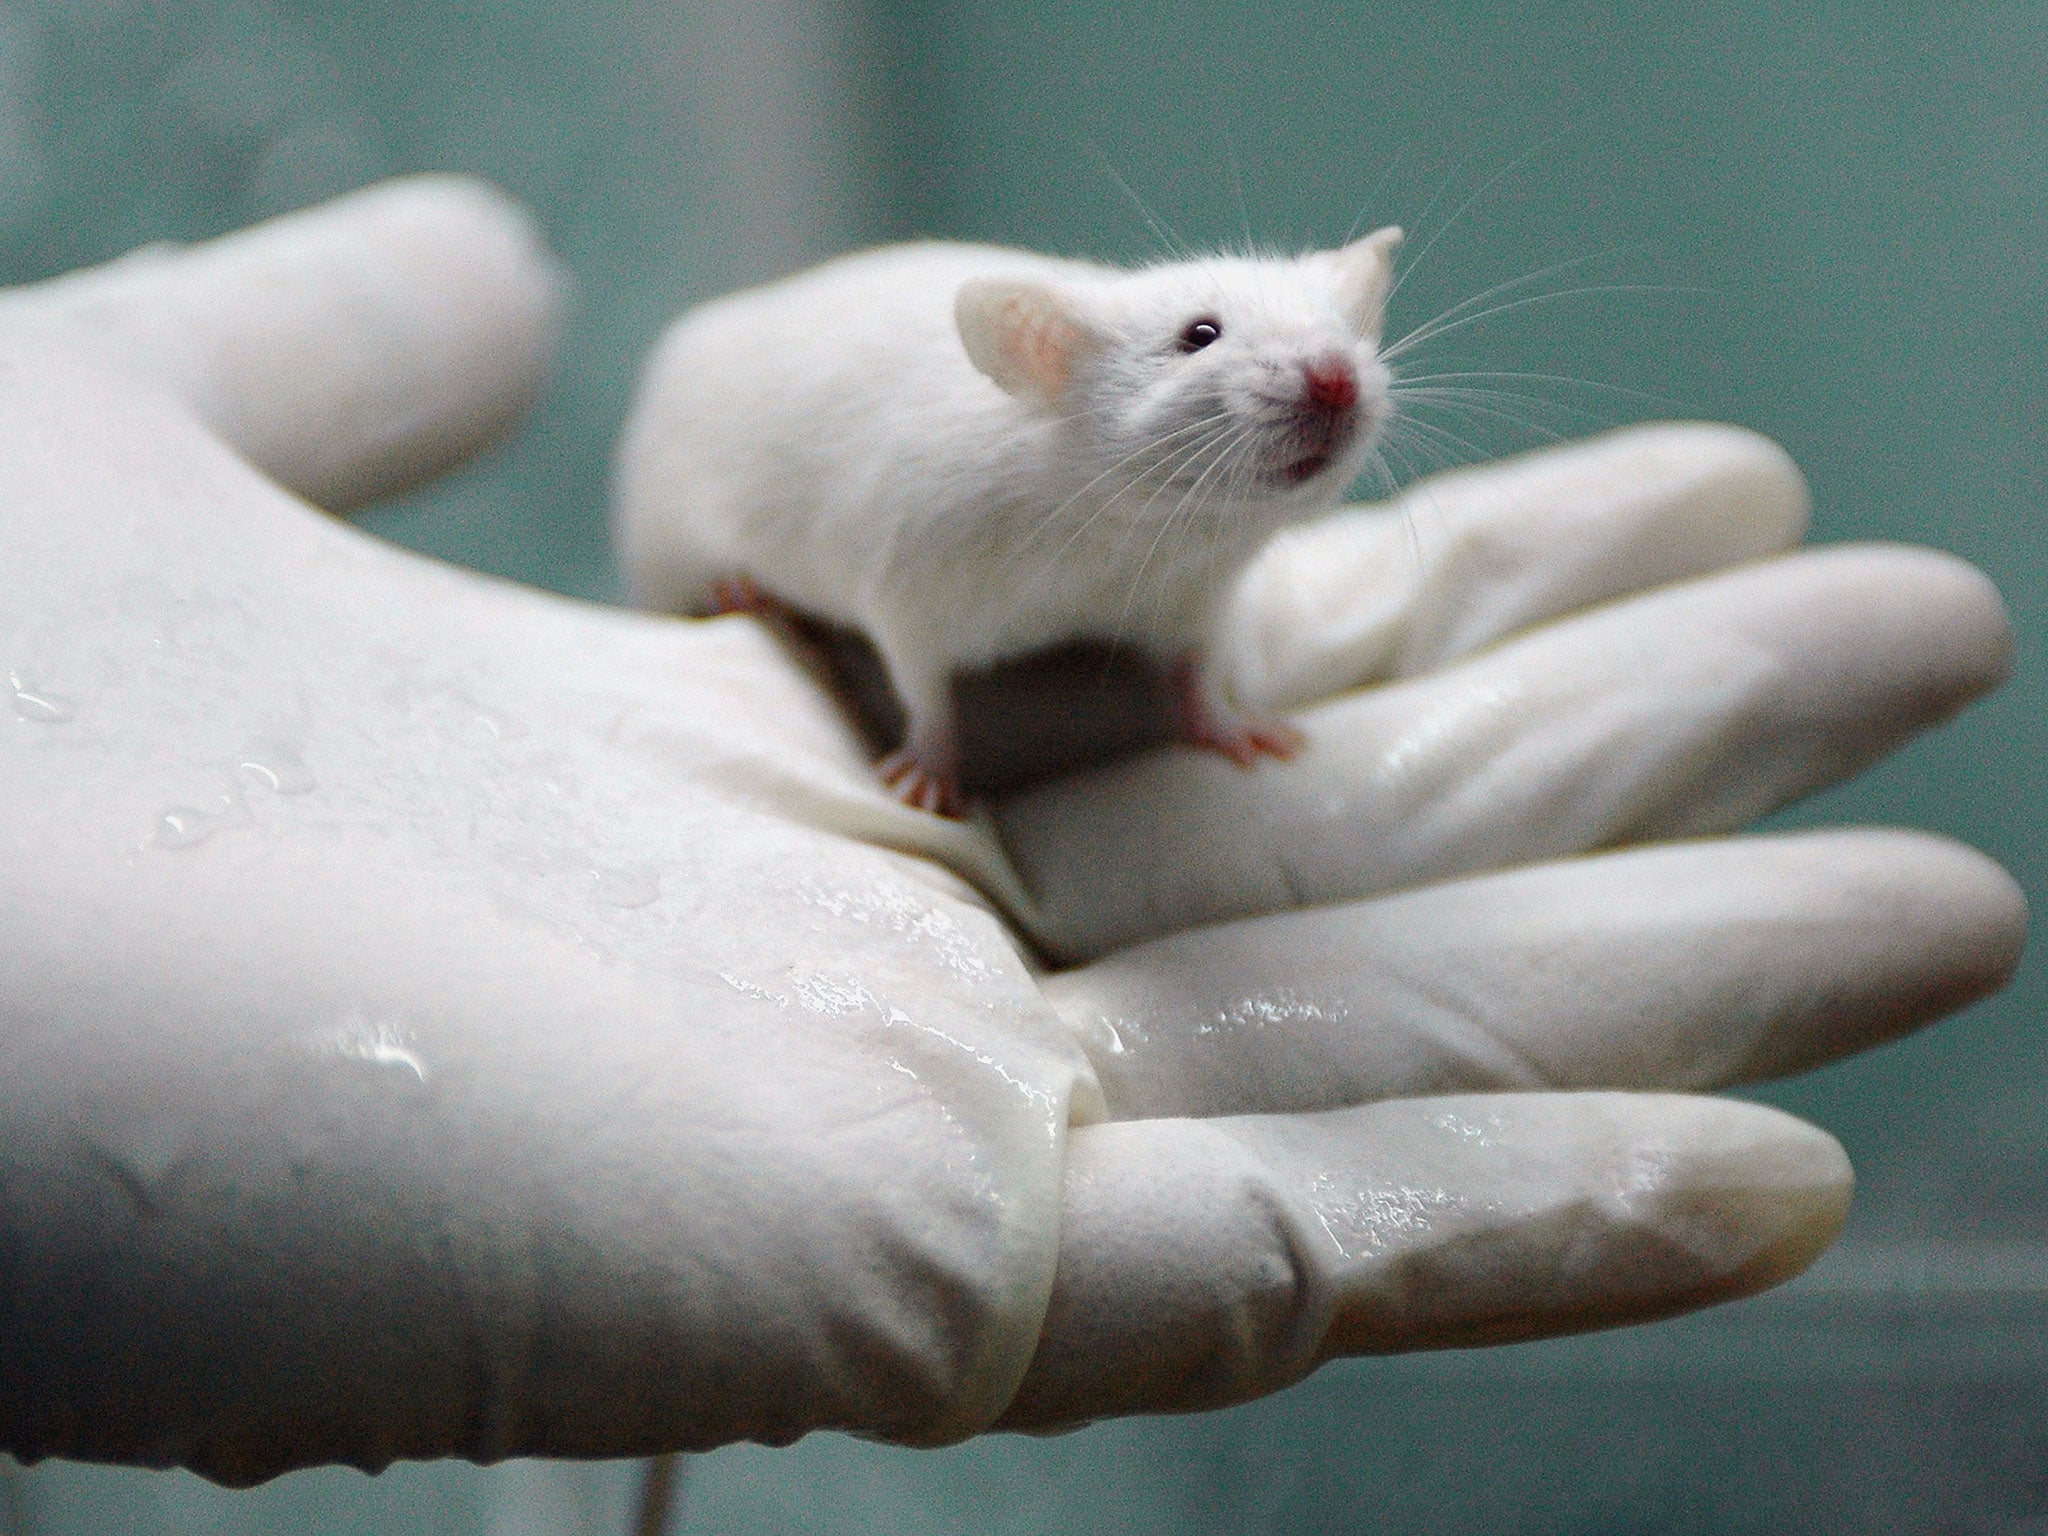 Studies in rats showed a decrease in neurogenesis in pregnant rats